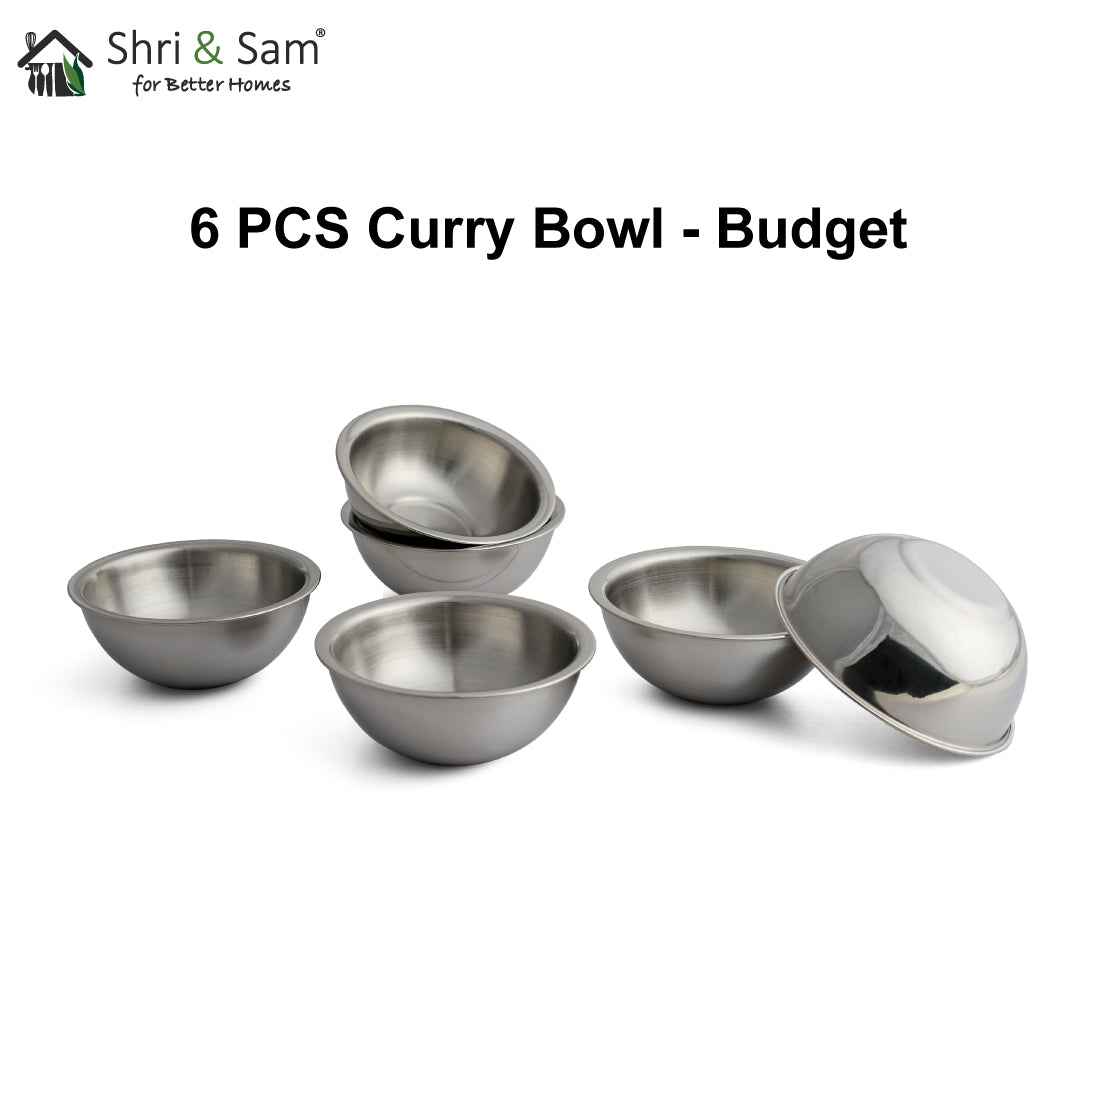 Stainless Steel 6 PCS Curry Bowl Budget